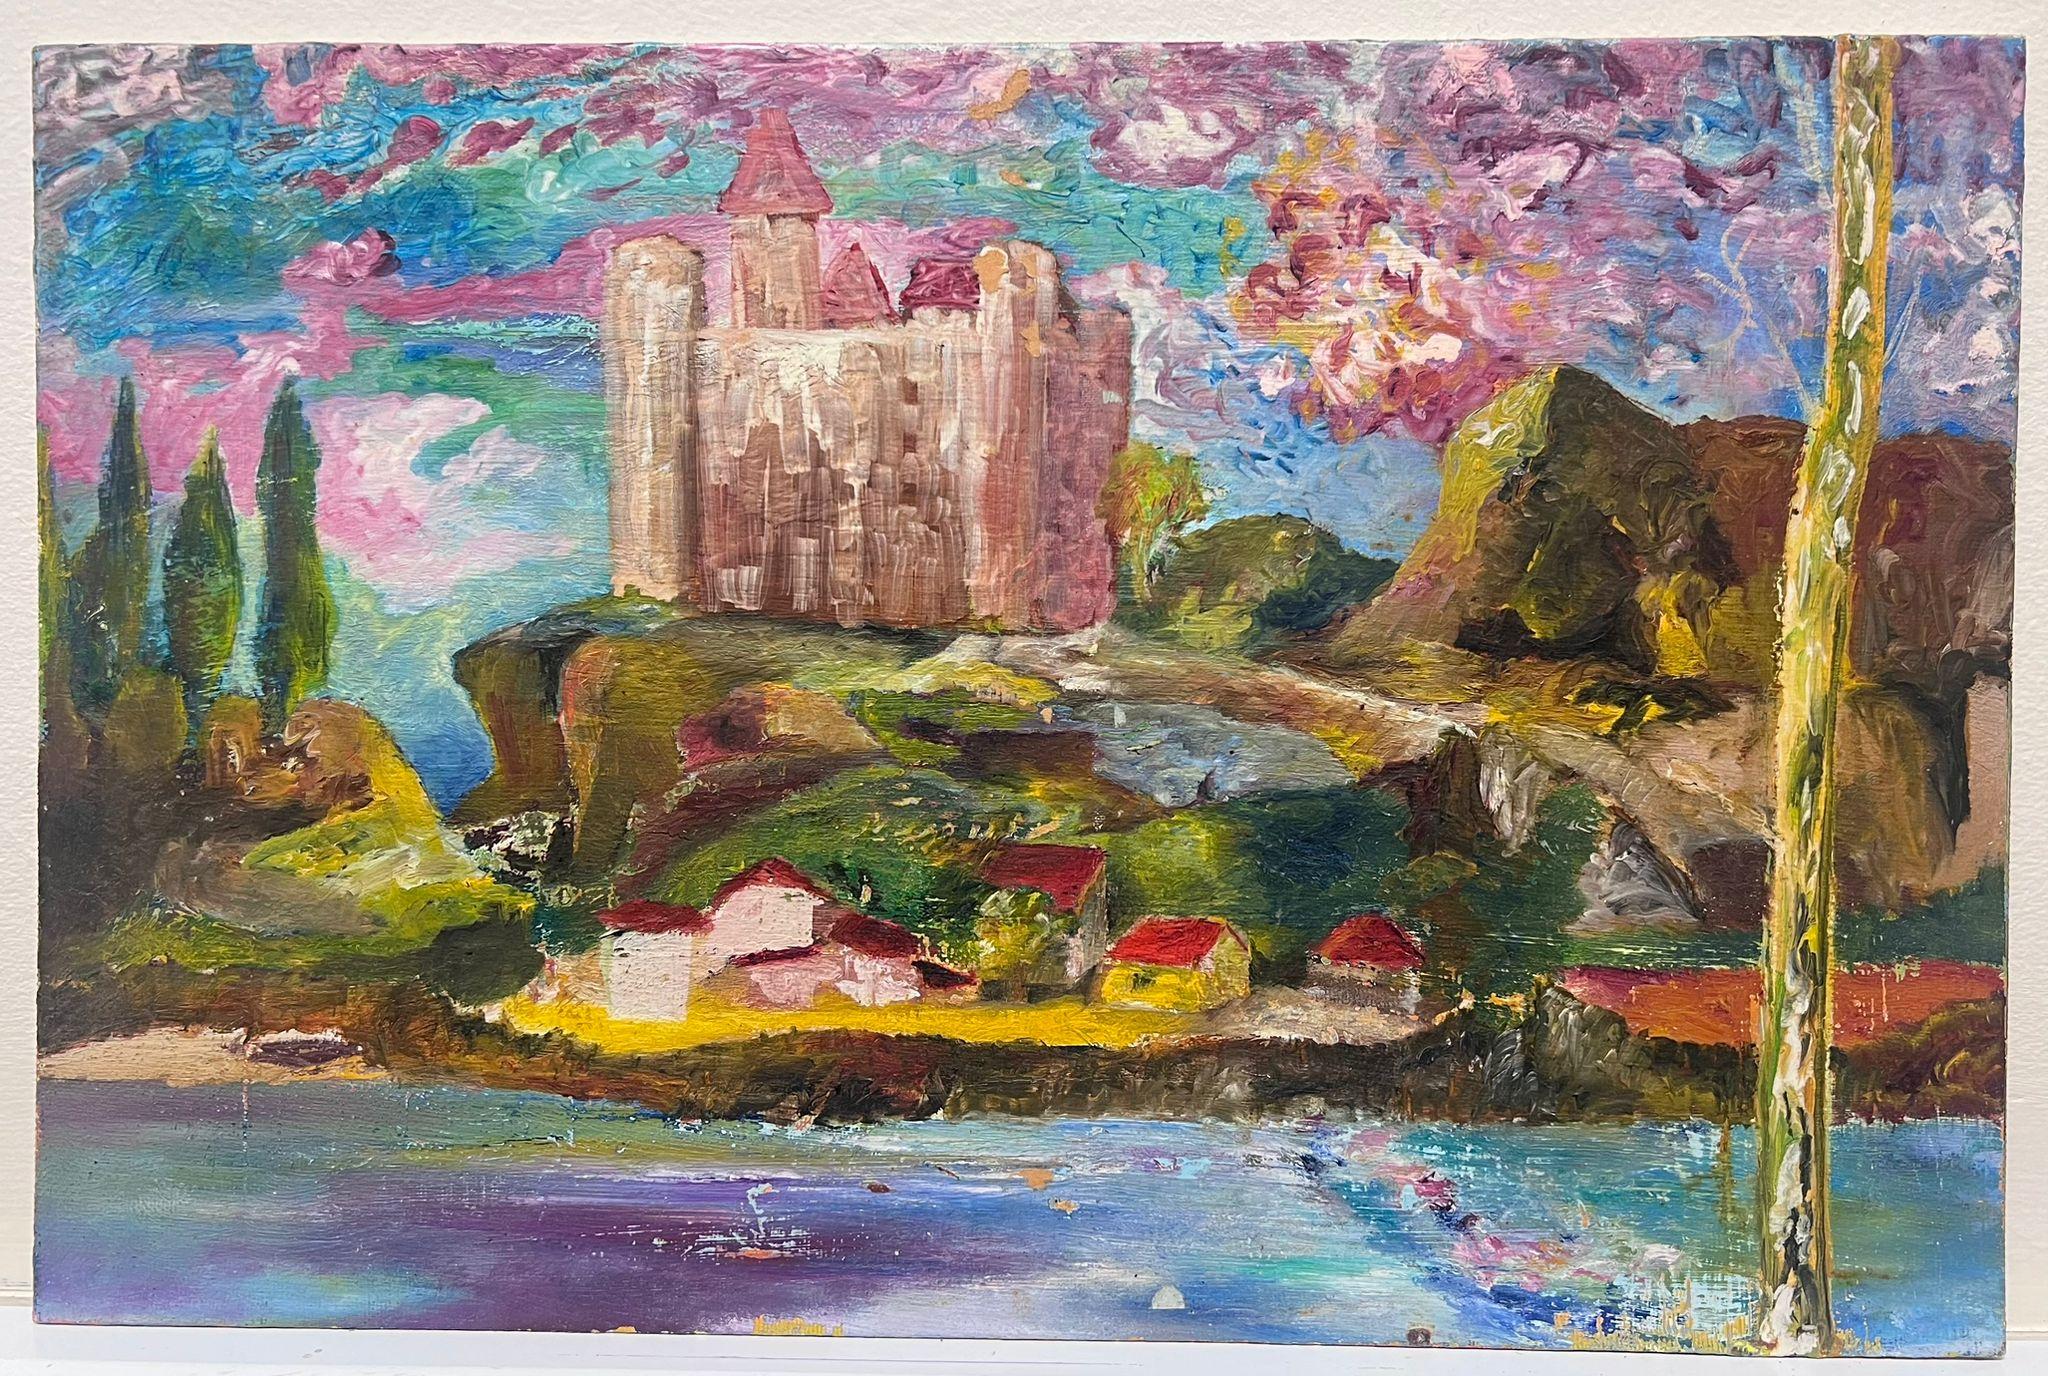 French Expressionist Fantasy Landscape Pink Castle Over Magical Village - Abstract Impressionist Painting by Jacques Coulais (1955-2011)